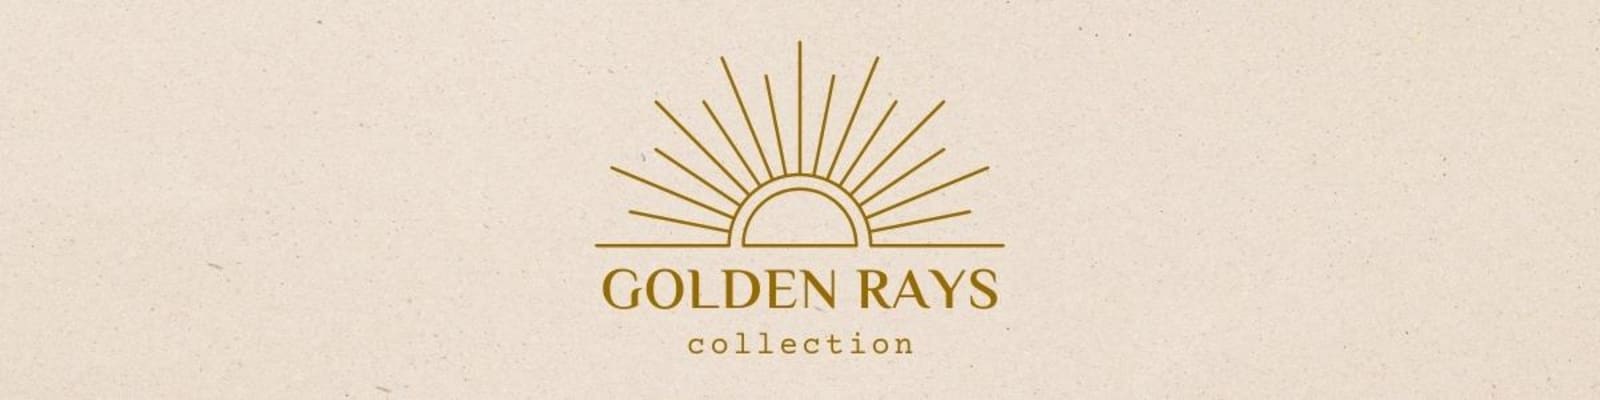 golden rays collection